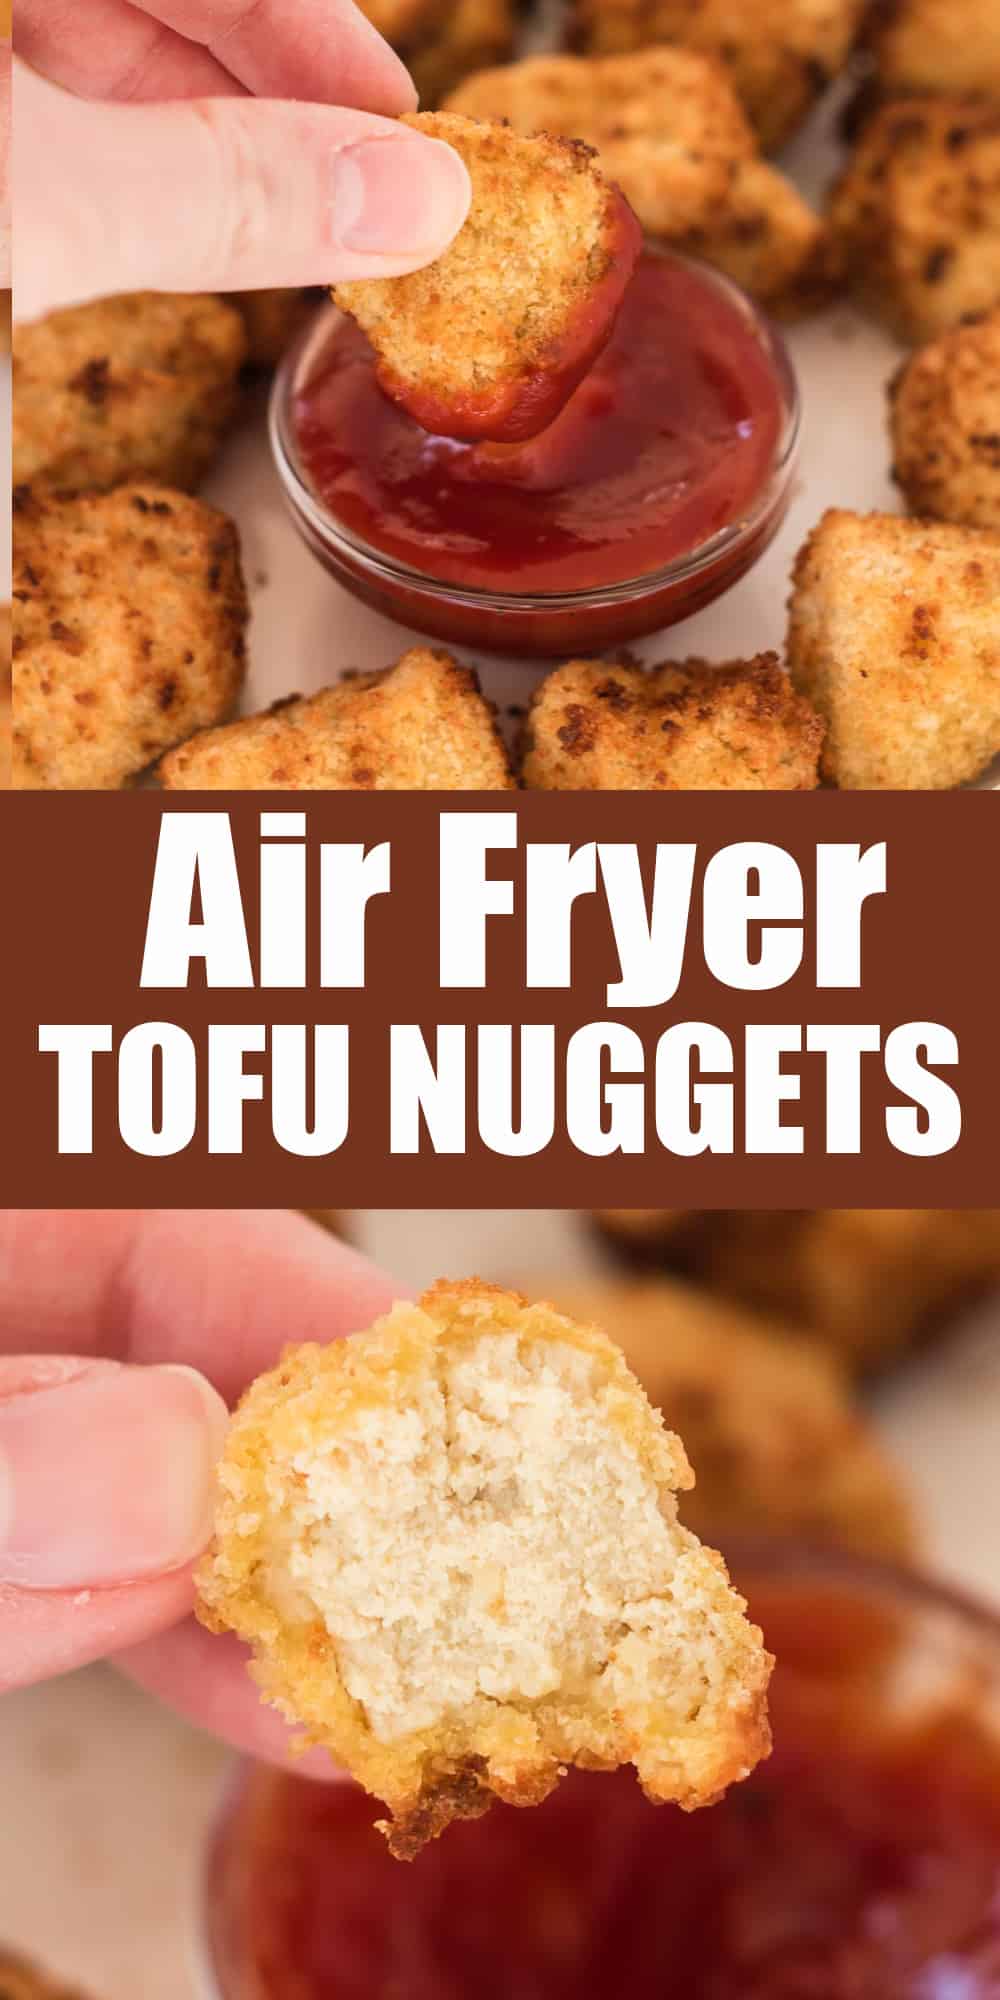 image with text "air fryer tofu nuggets"